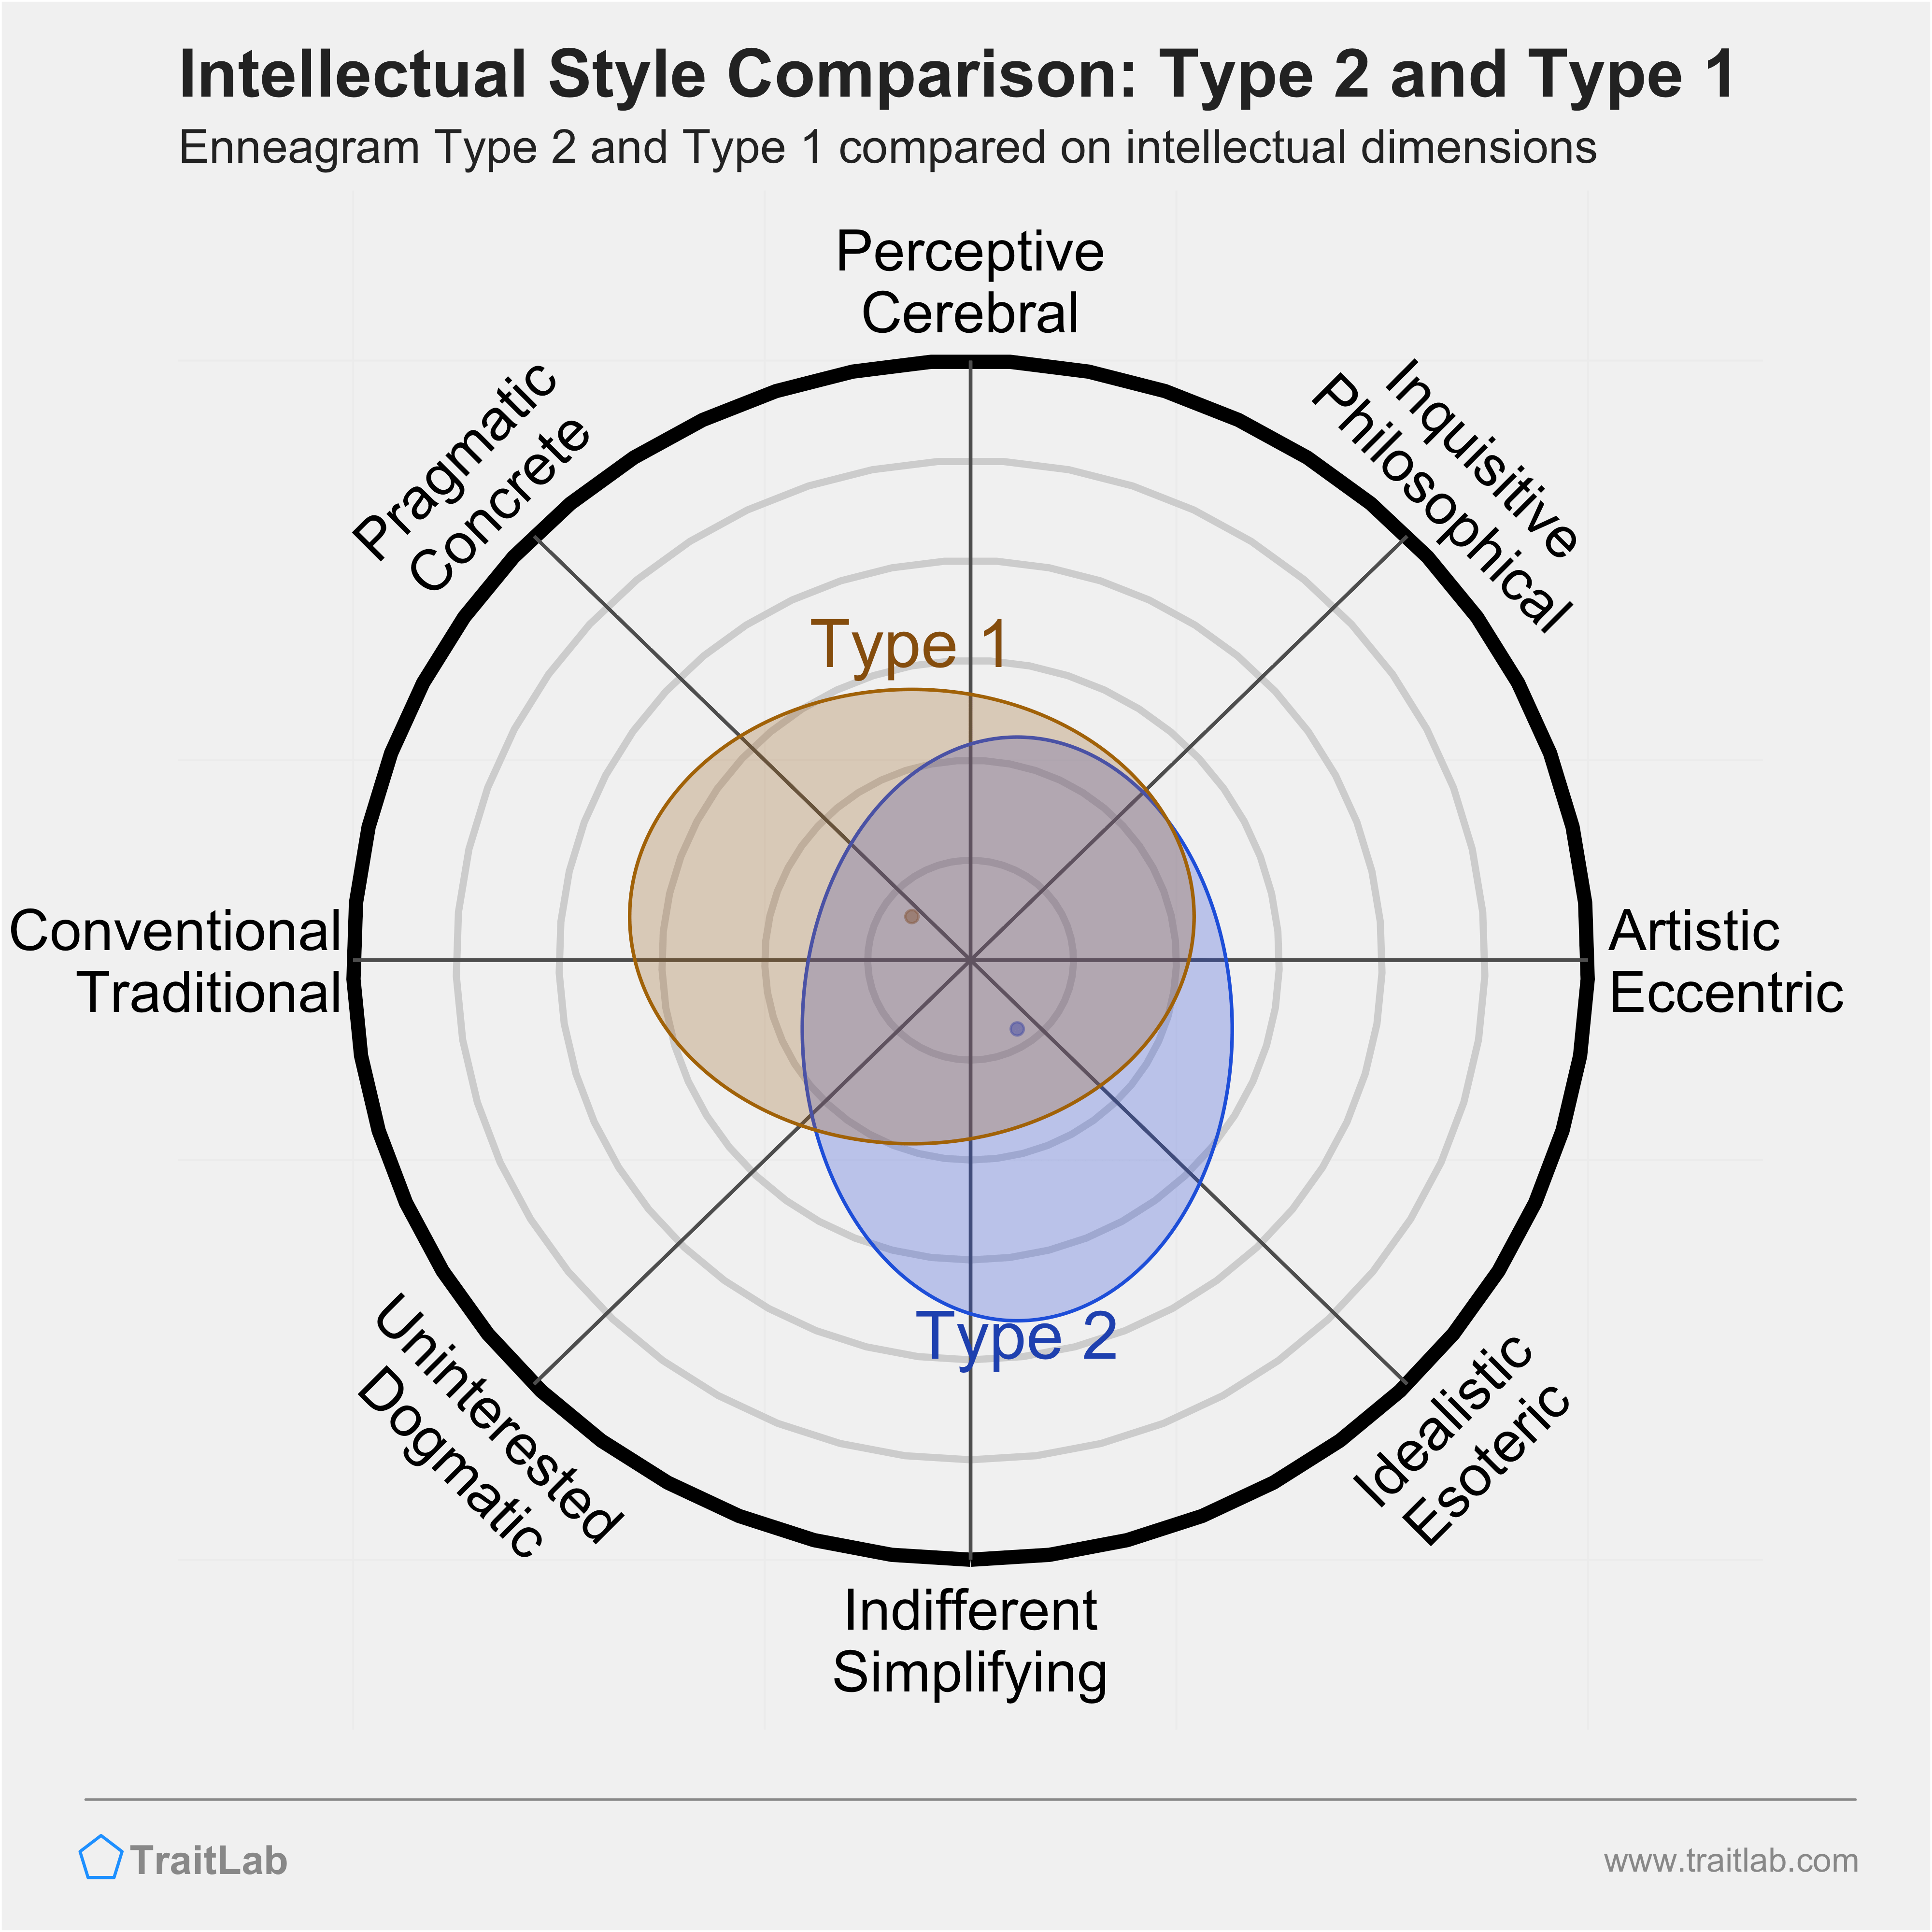 Type 2 and Type 1 comparison across intellectual dimensions